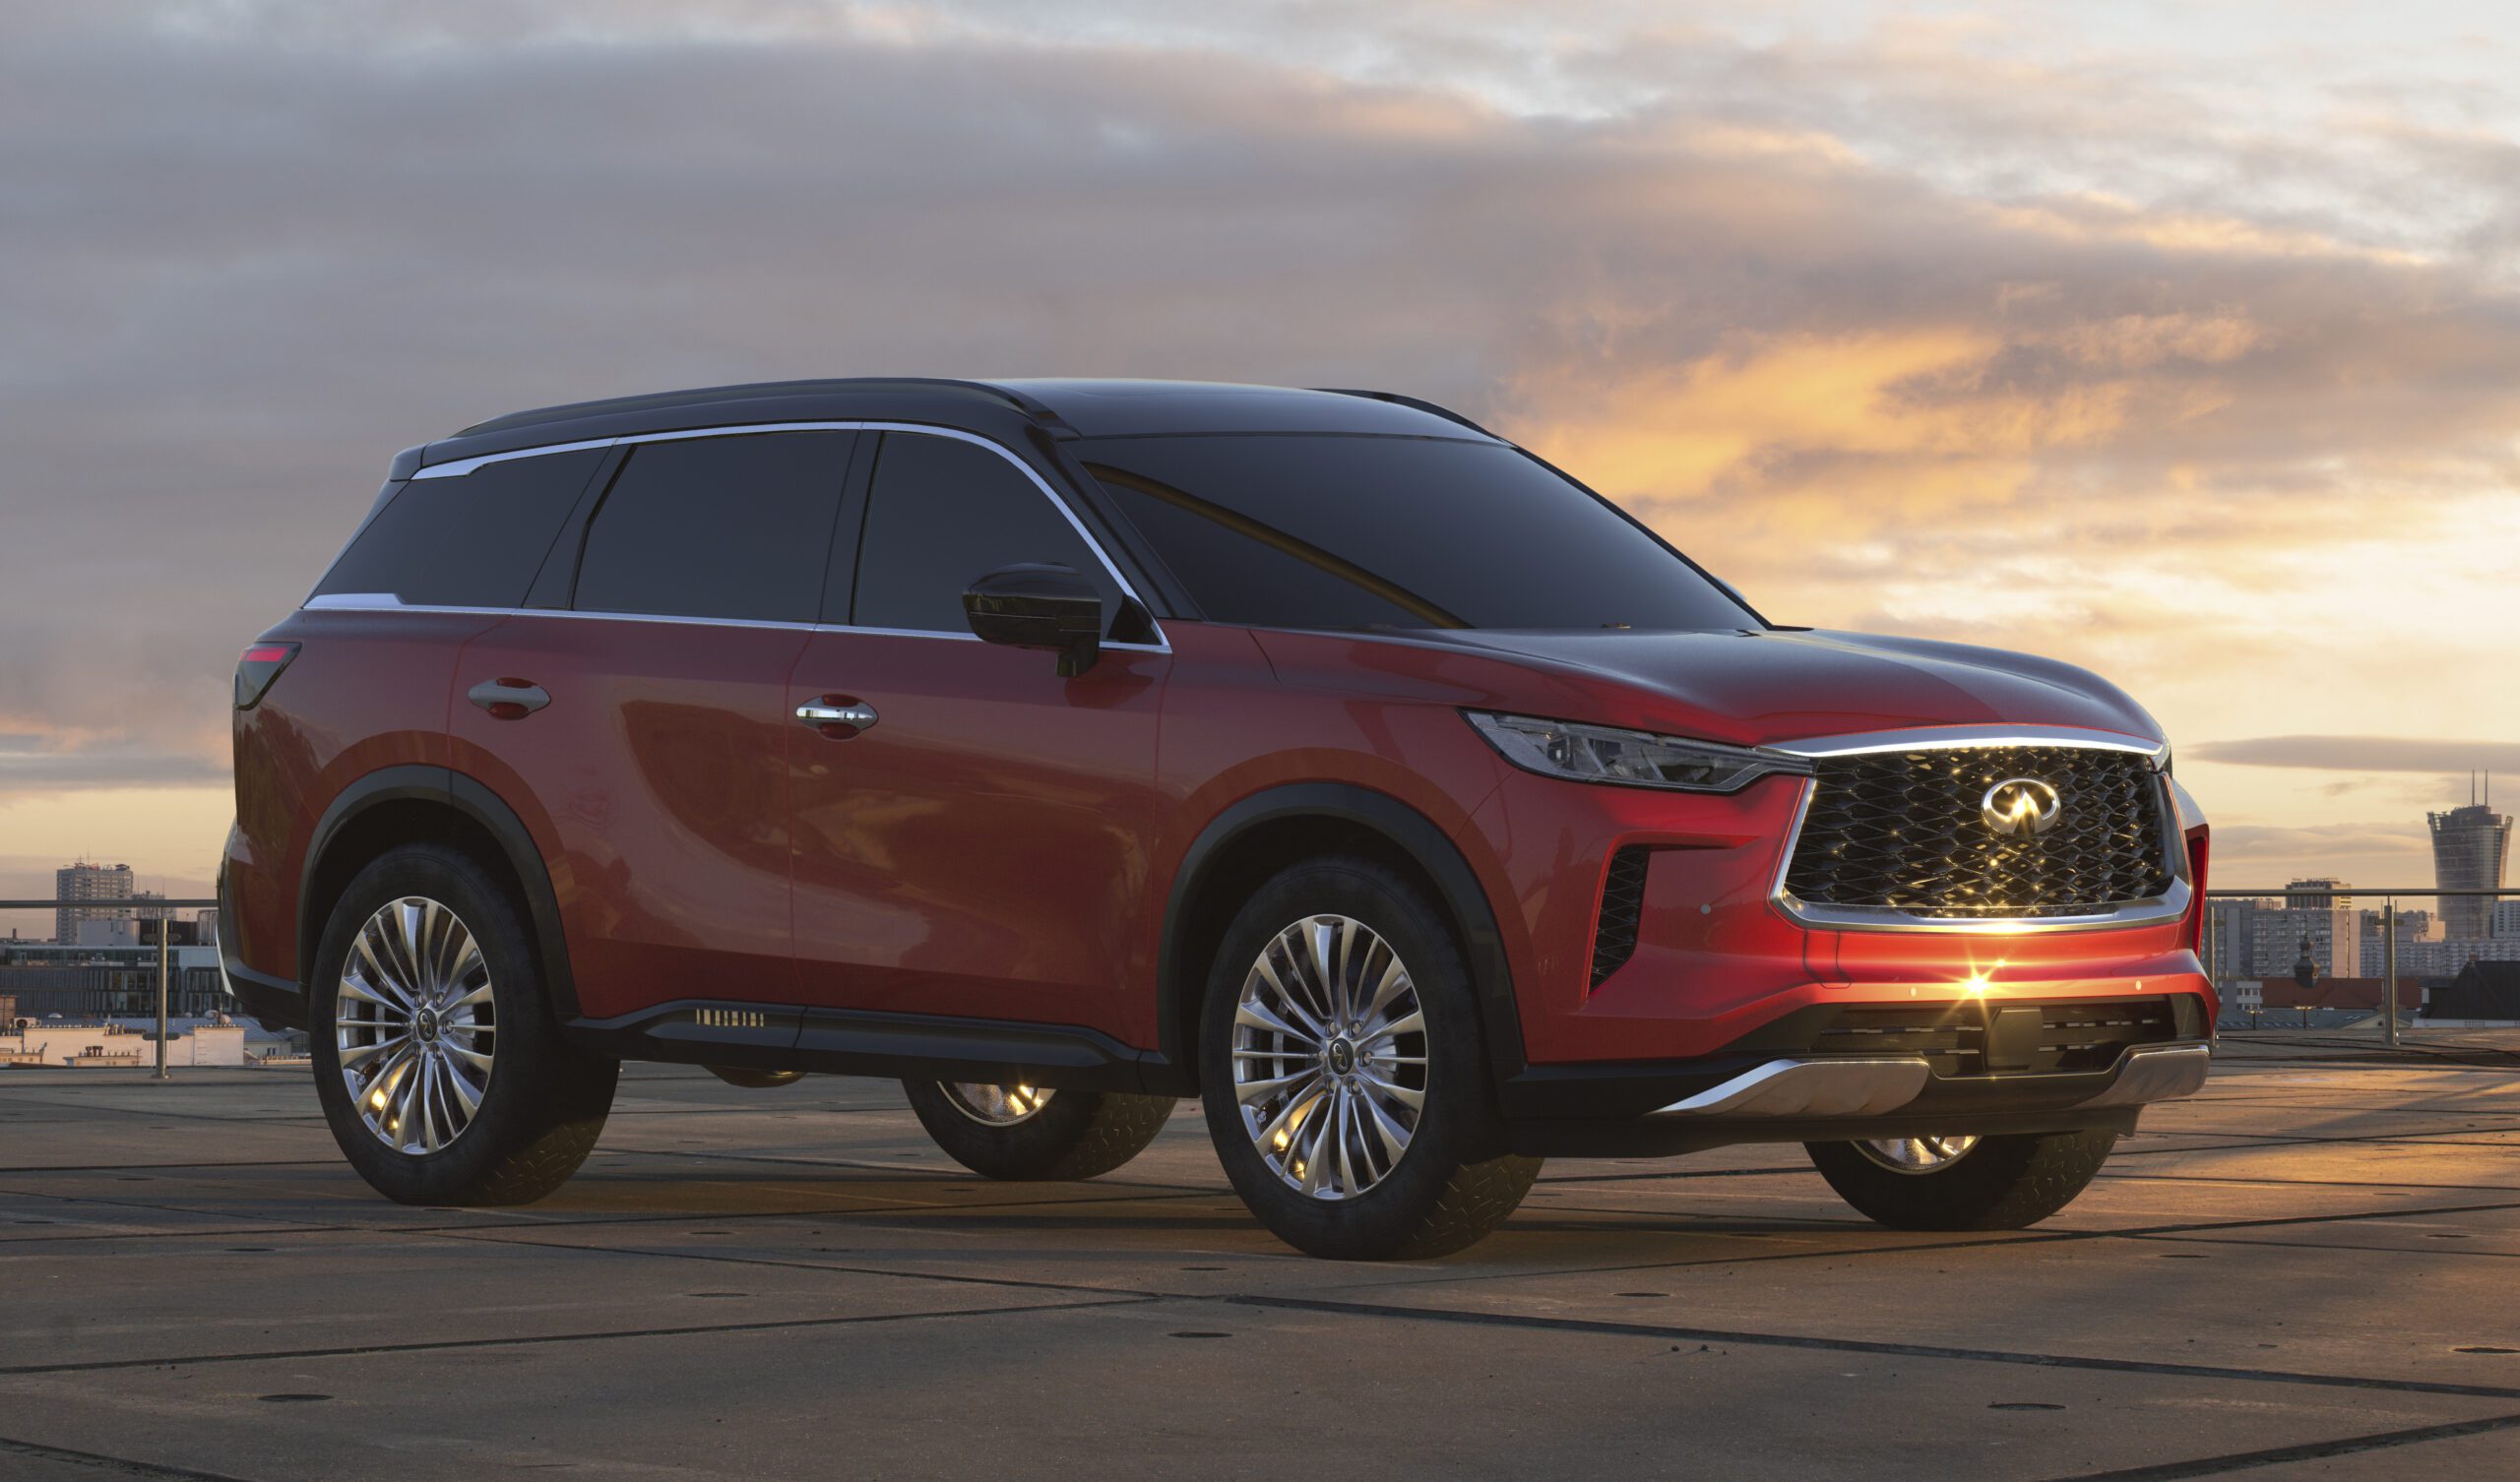 A proposed class action alleges a defect in the transmission of 2019-2021 Nissan Pathfinders and INFINITI QX60s.